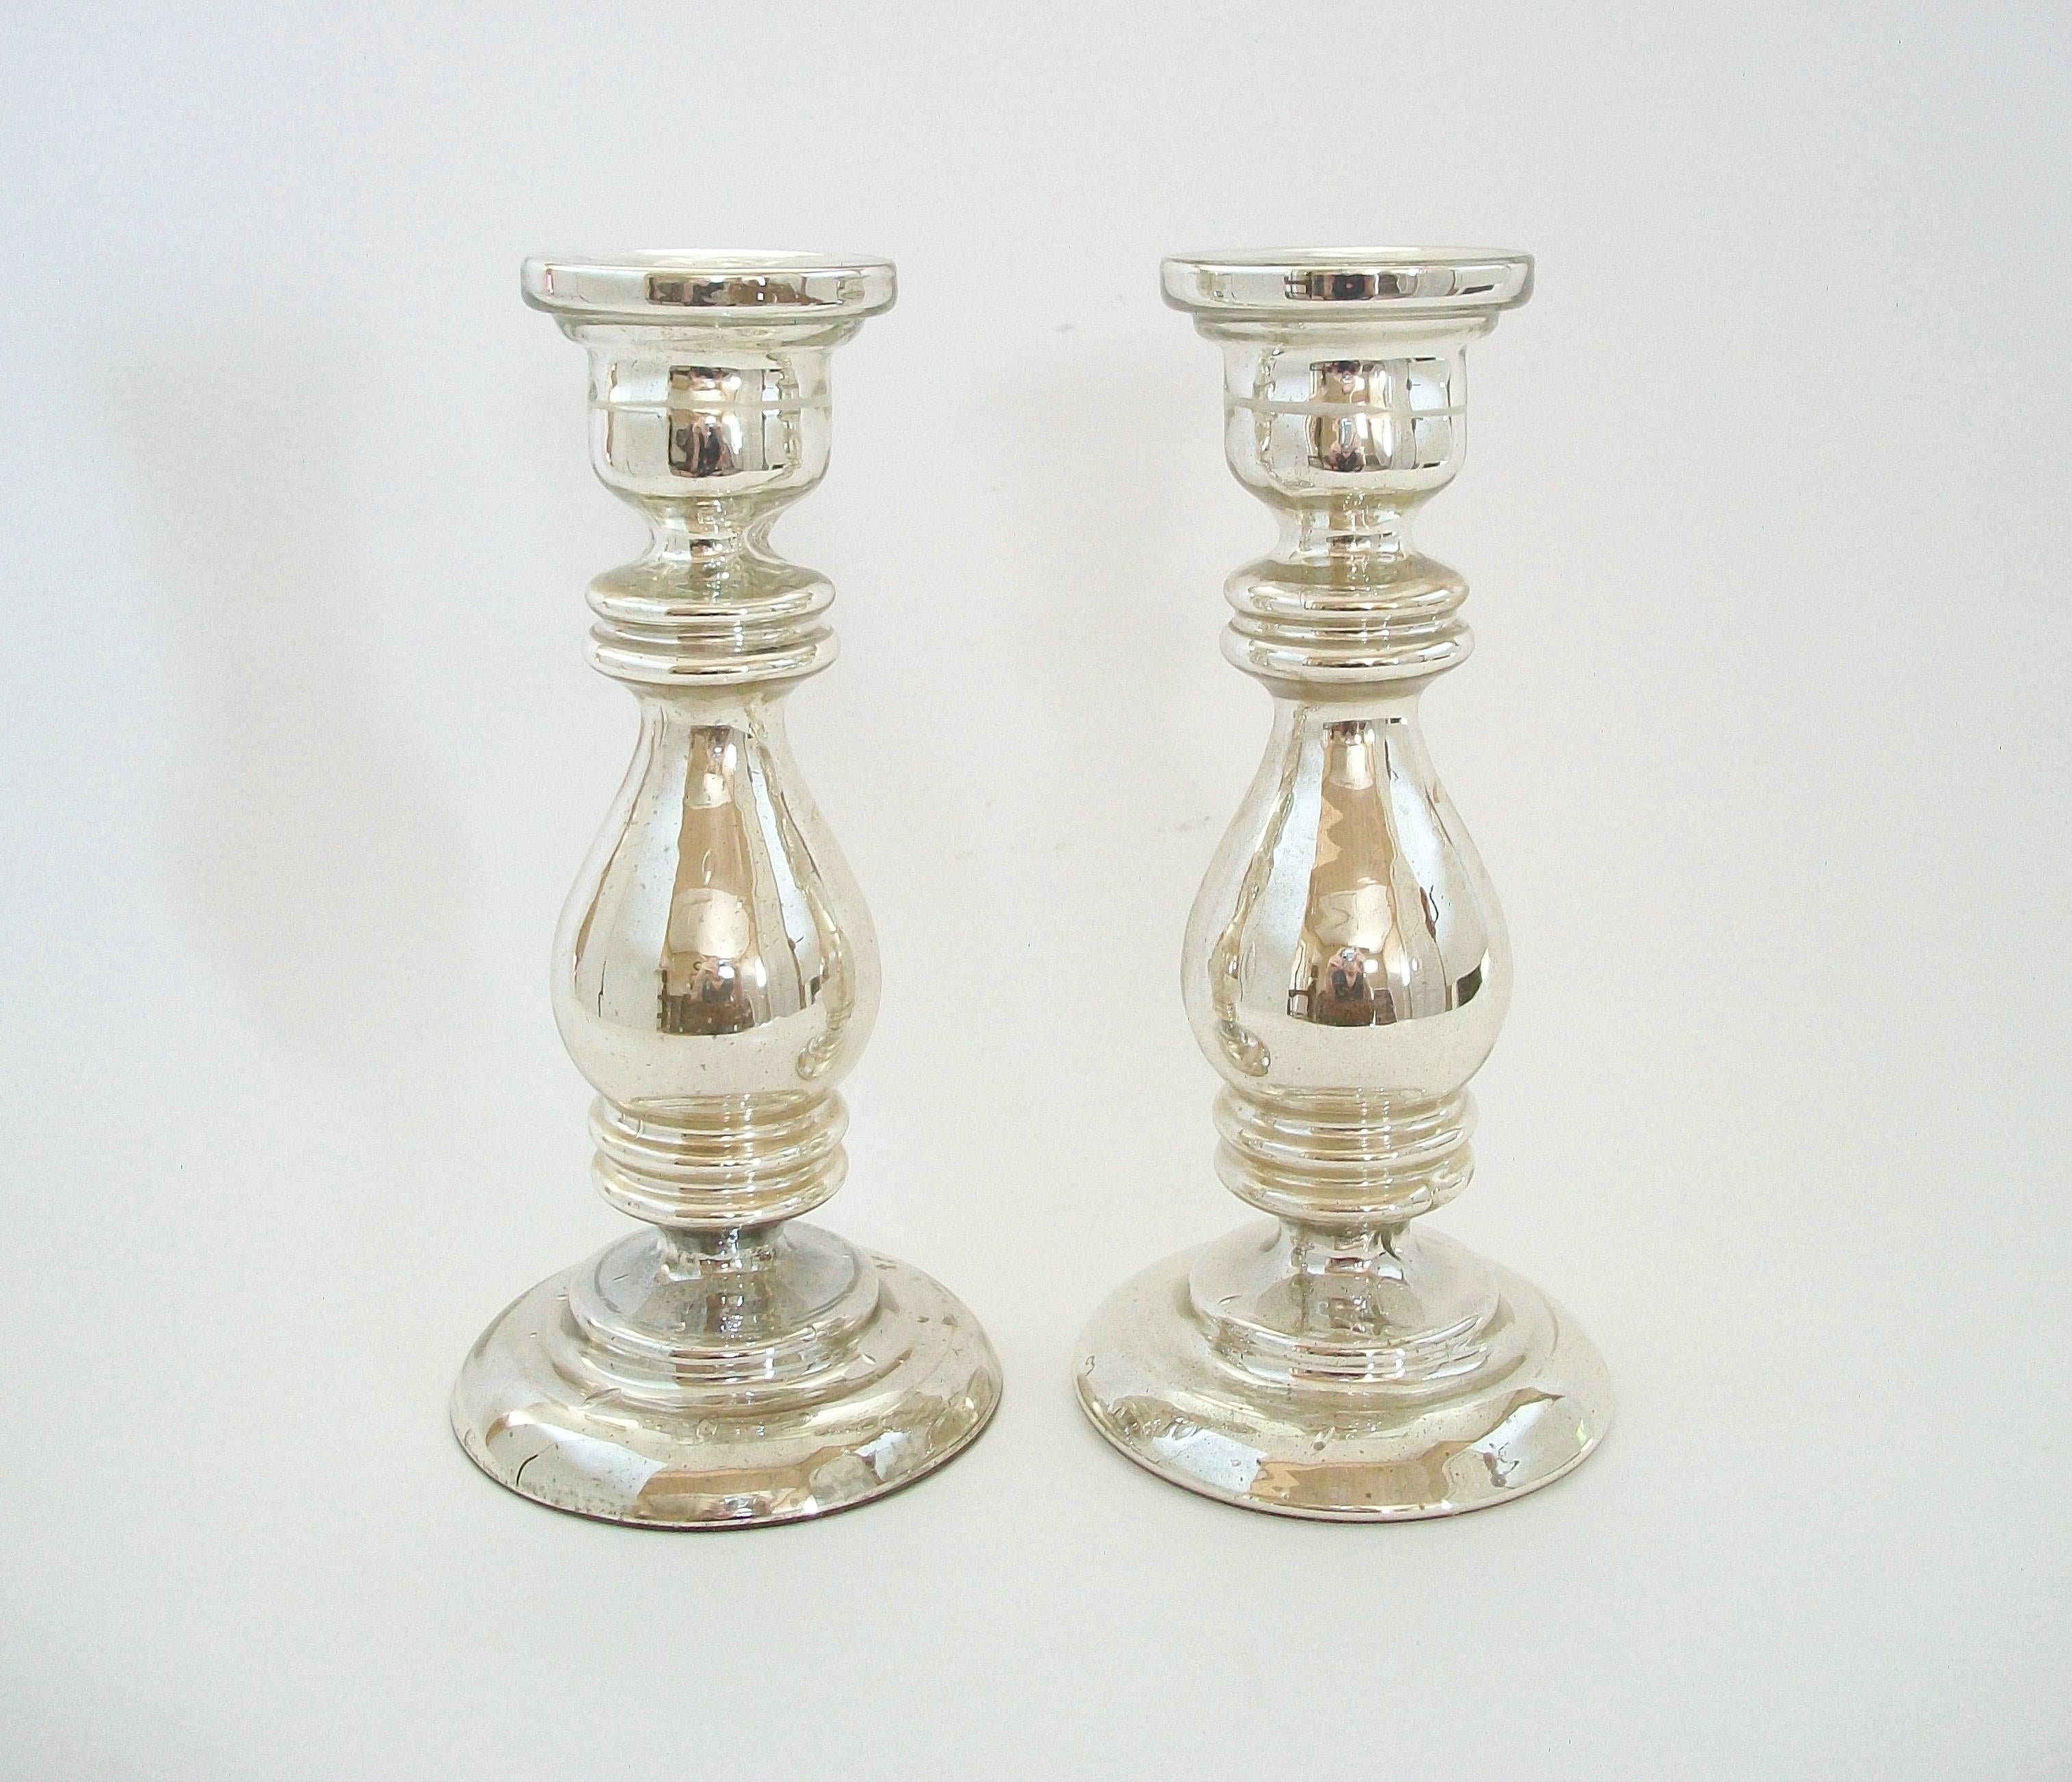 Hand-Crafted Antique Pair of Painted Mercury Glass Candlesticks - France - Late 19th Century